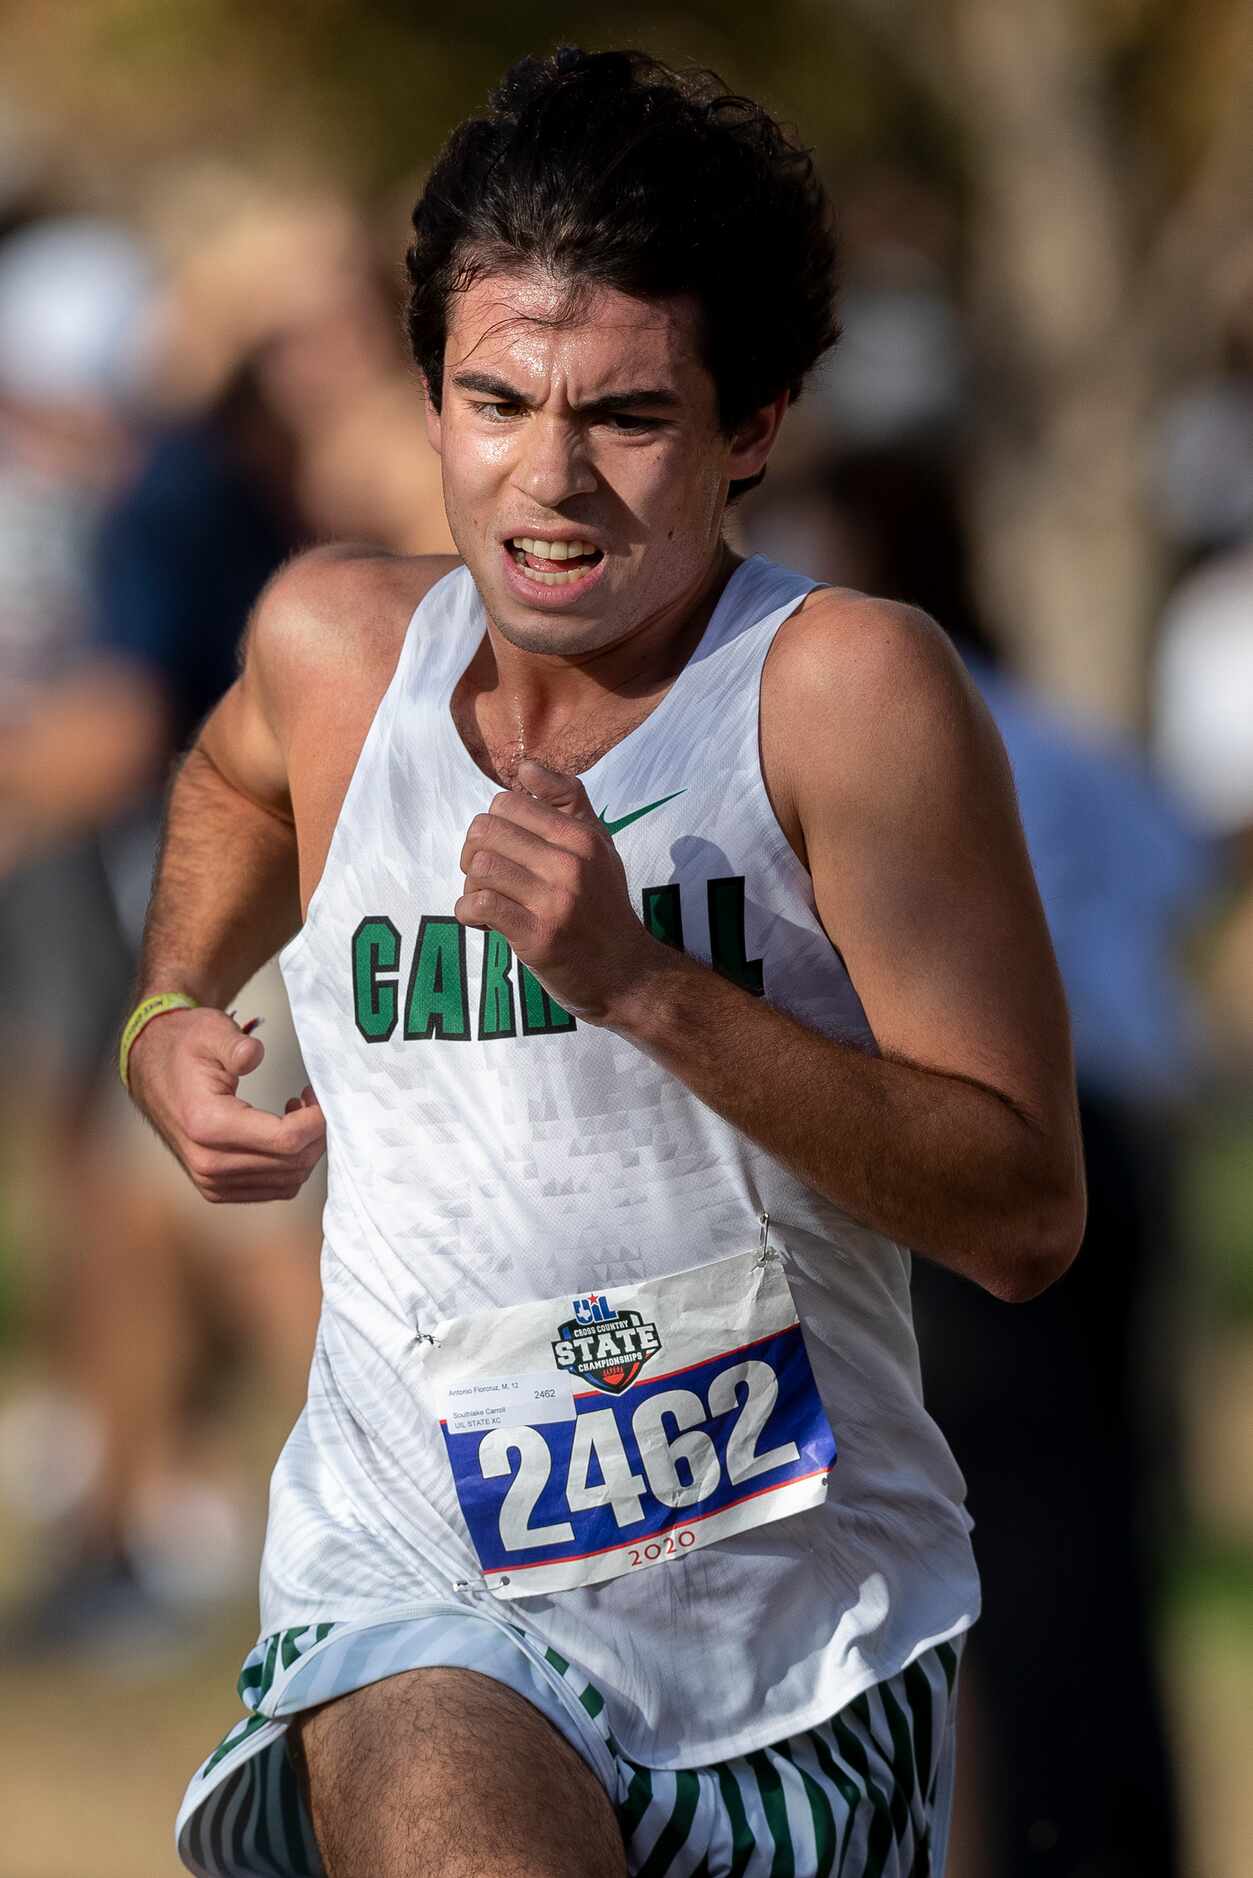 Southlake Carroll's Antonio Florcruz (2462) finishes fifth in the boys UIL Class 6A state...